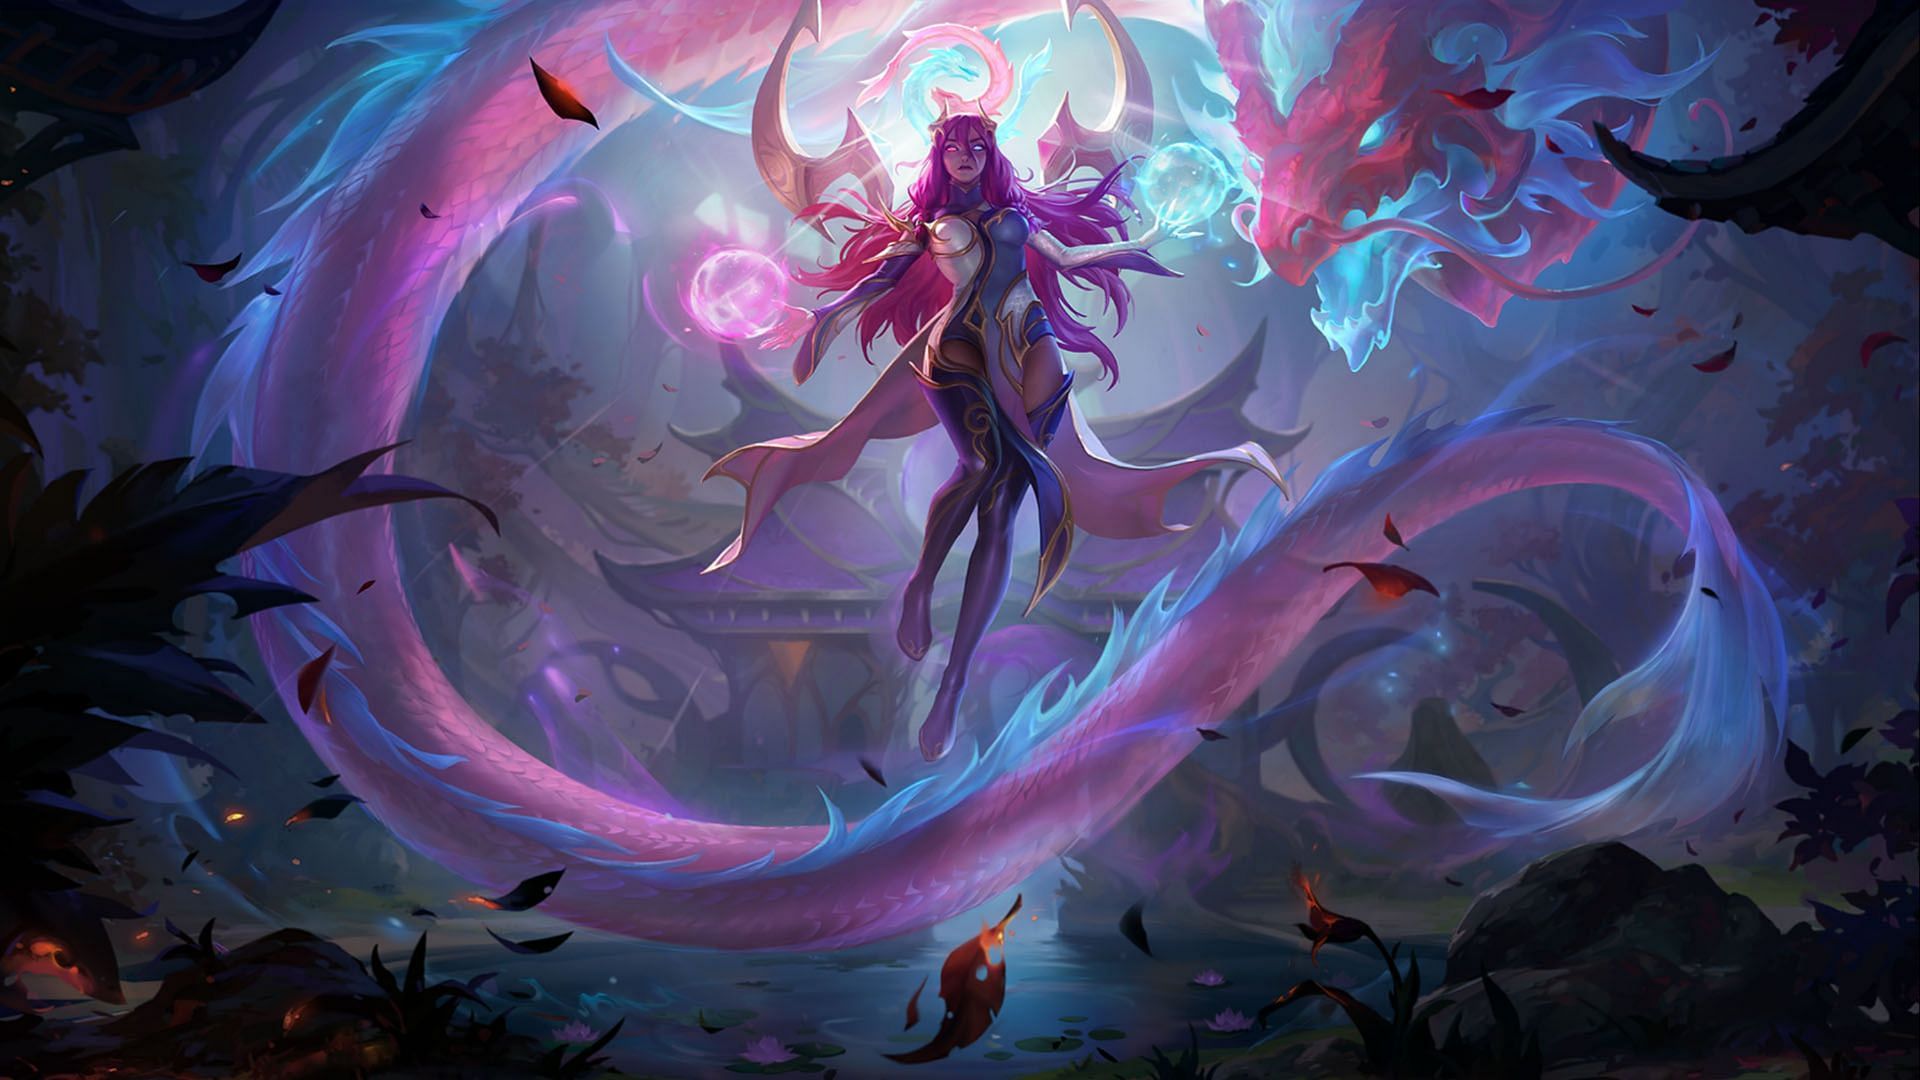 Tranquility Dragon Karma in Legends of Runeterra (Image via Riot Games)